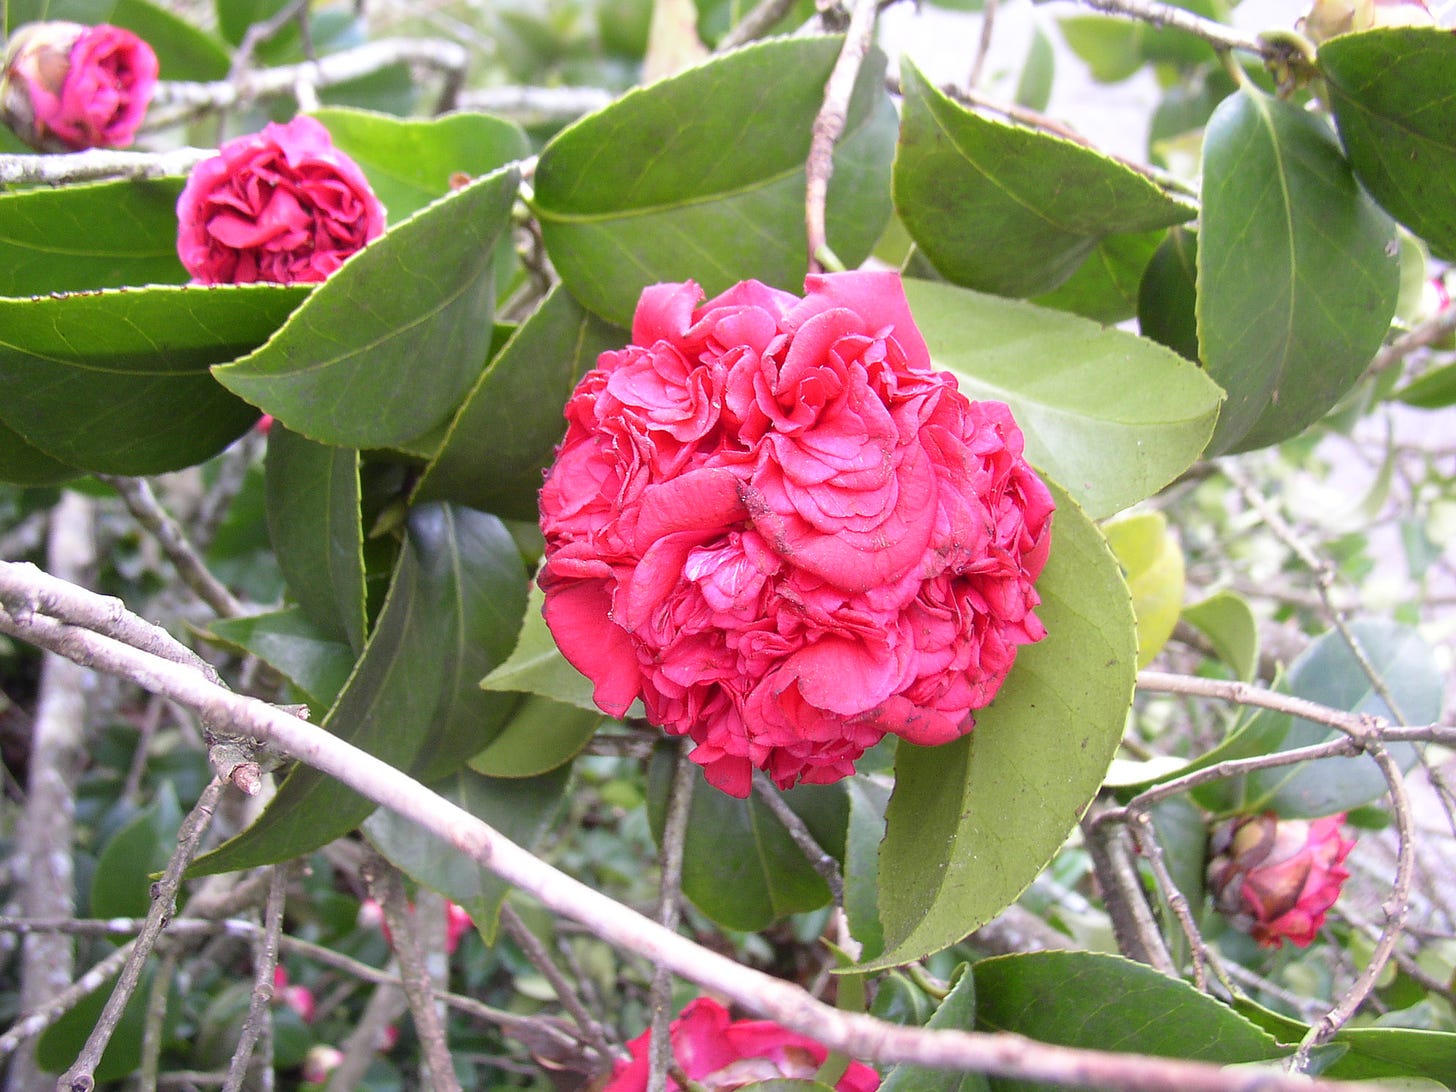 Faded frilly pinky-red camellia blossom